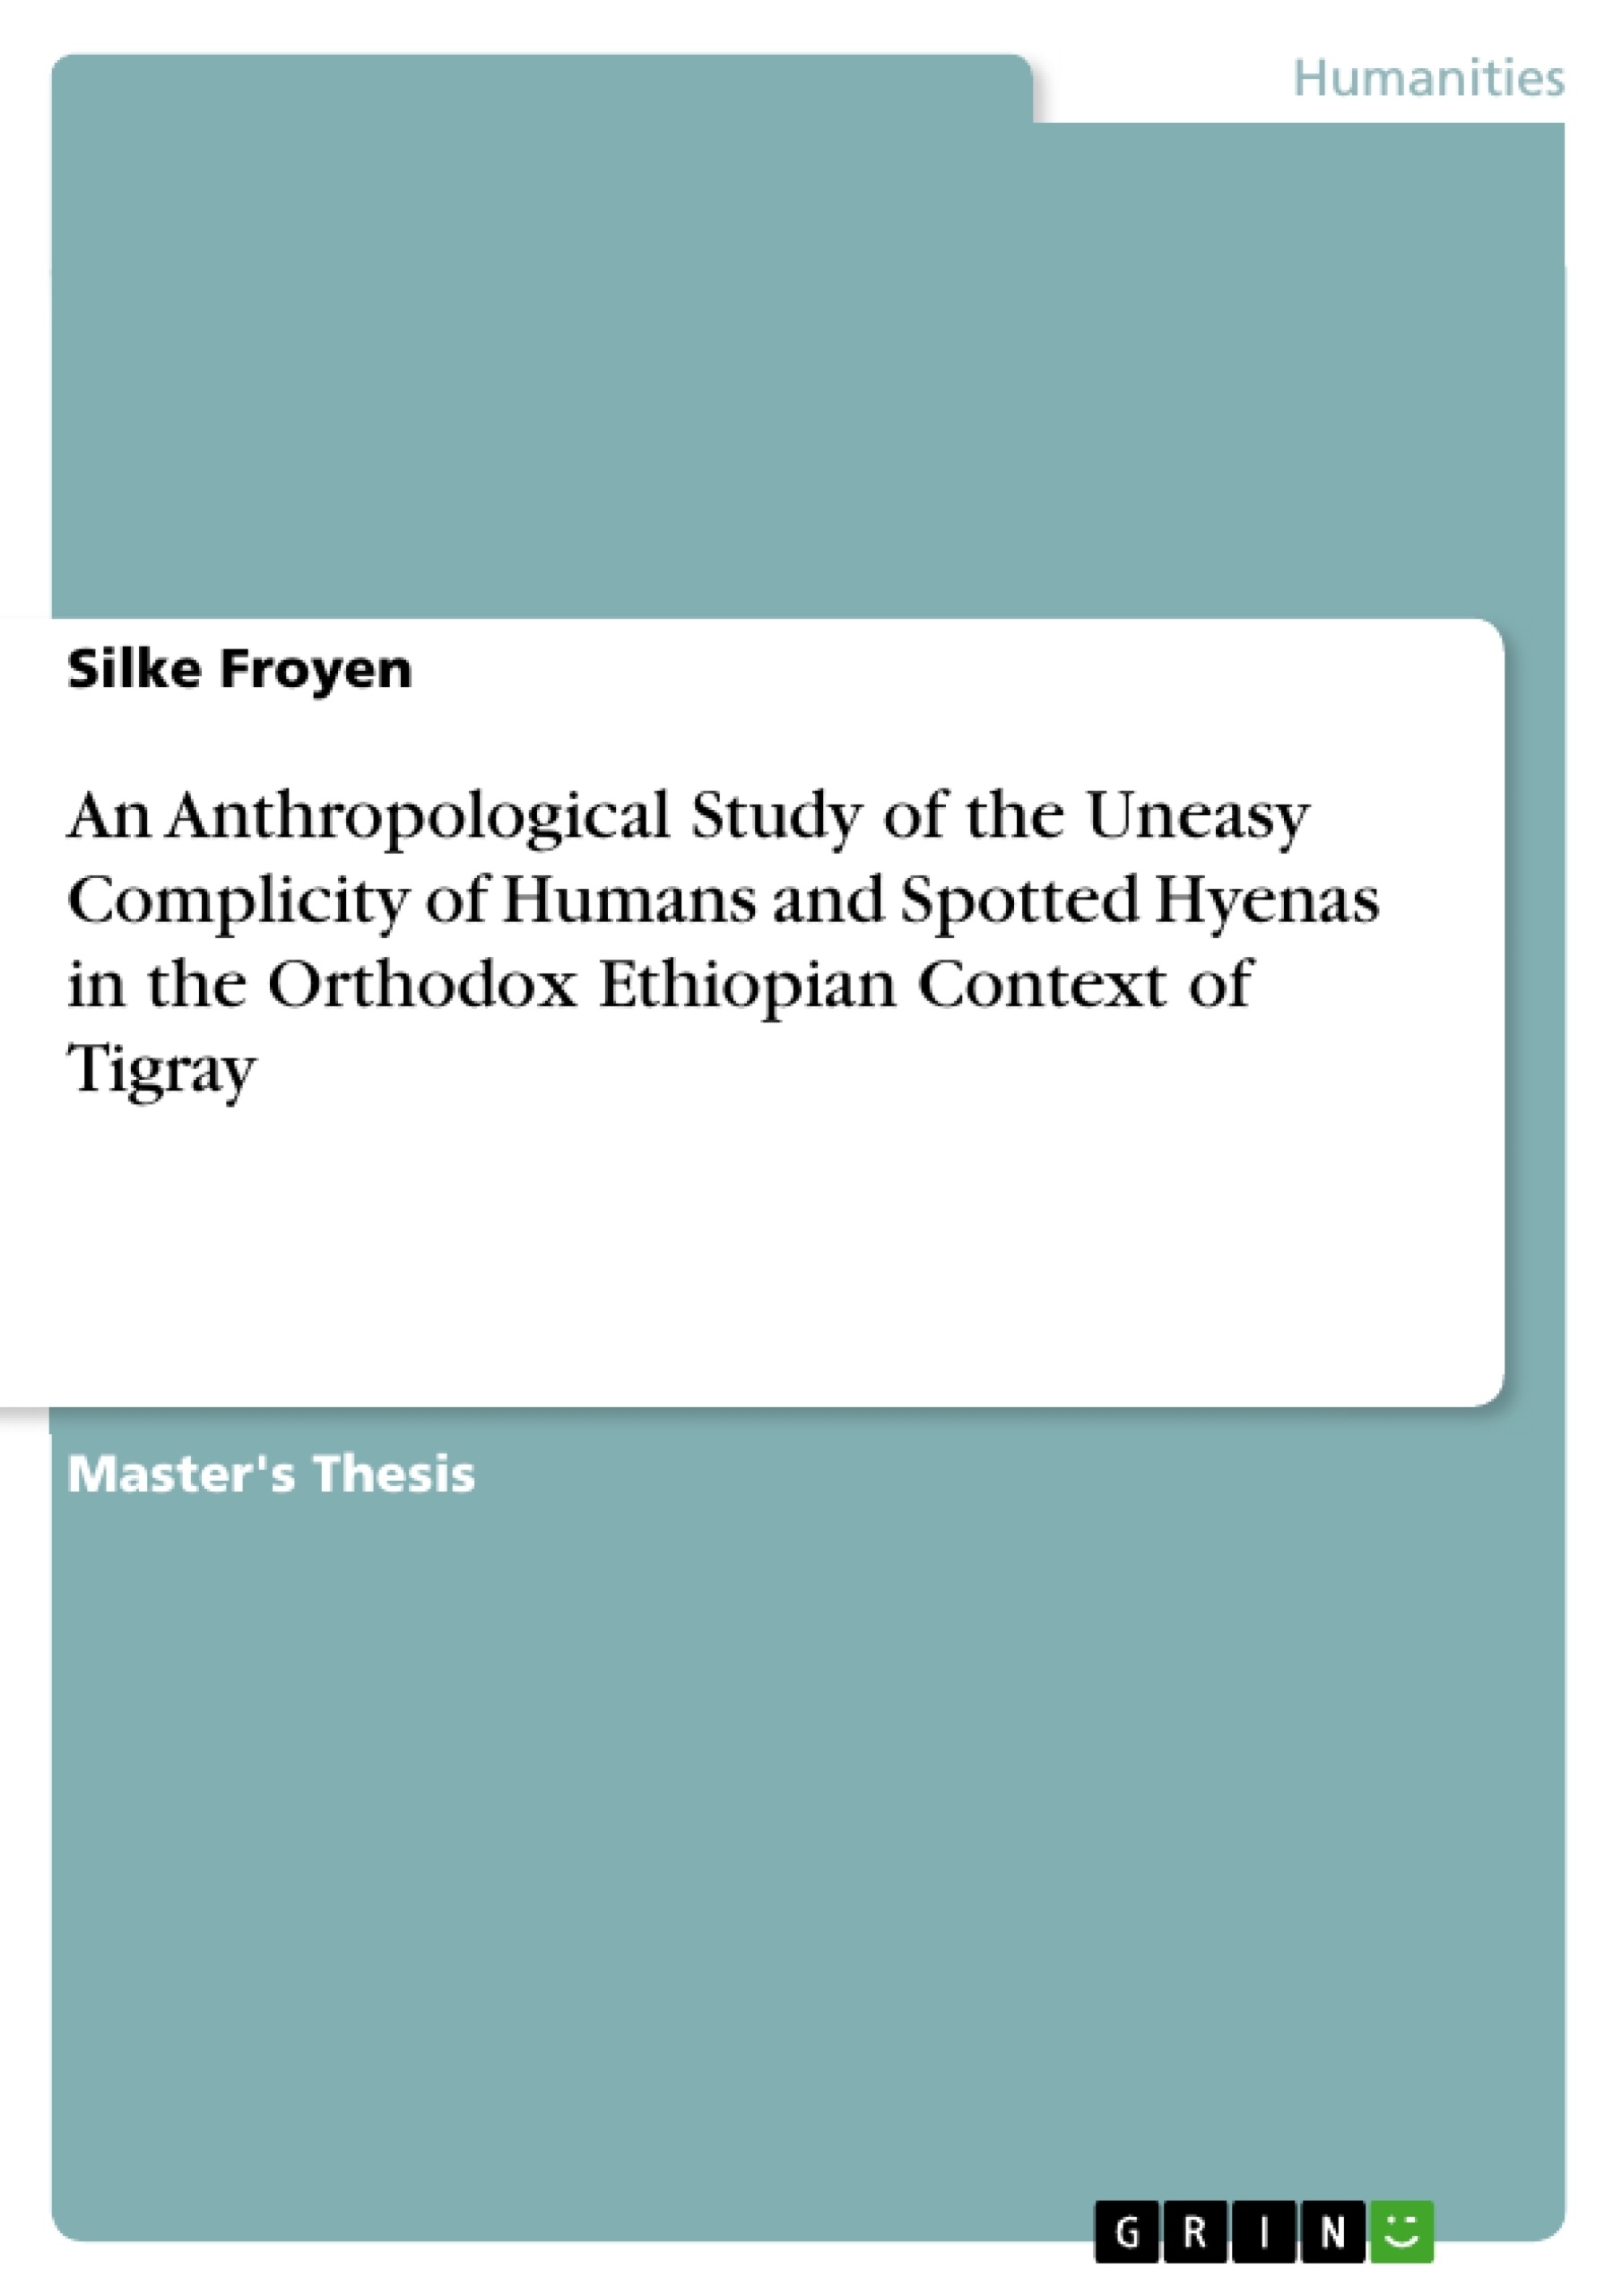 Title: An Anthropological Study of the Uneasy Complicity of Humans and Spotted Hyenas in the Orthodox Ethiopian Context of Tigray